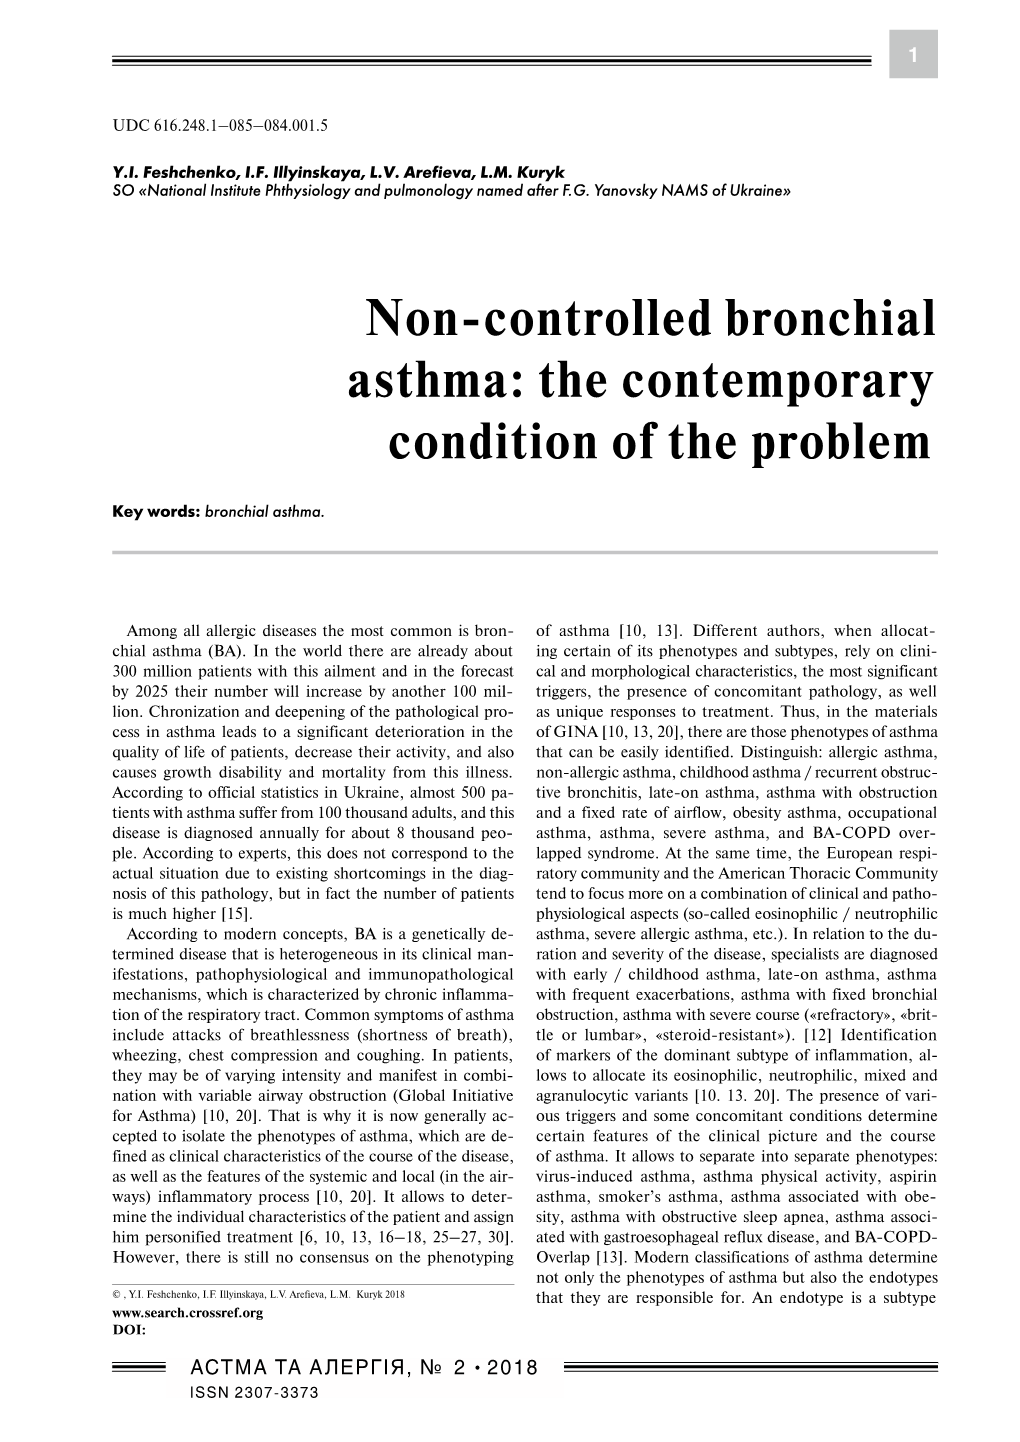 Non-Controlled Bronchial Asthma: the Contemporary Condition of the Problem